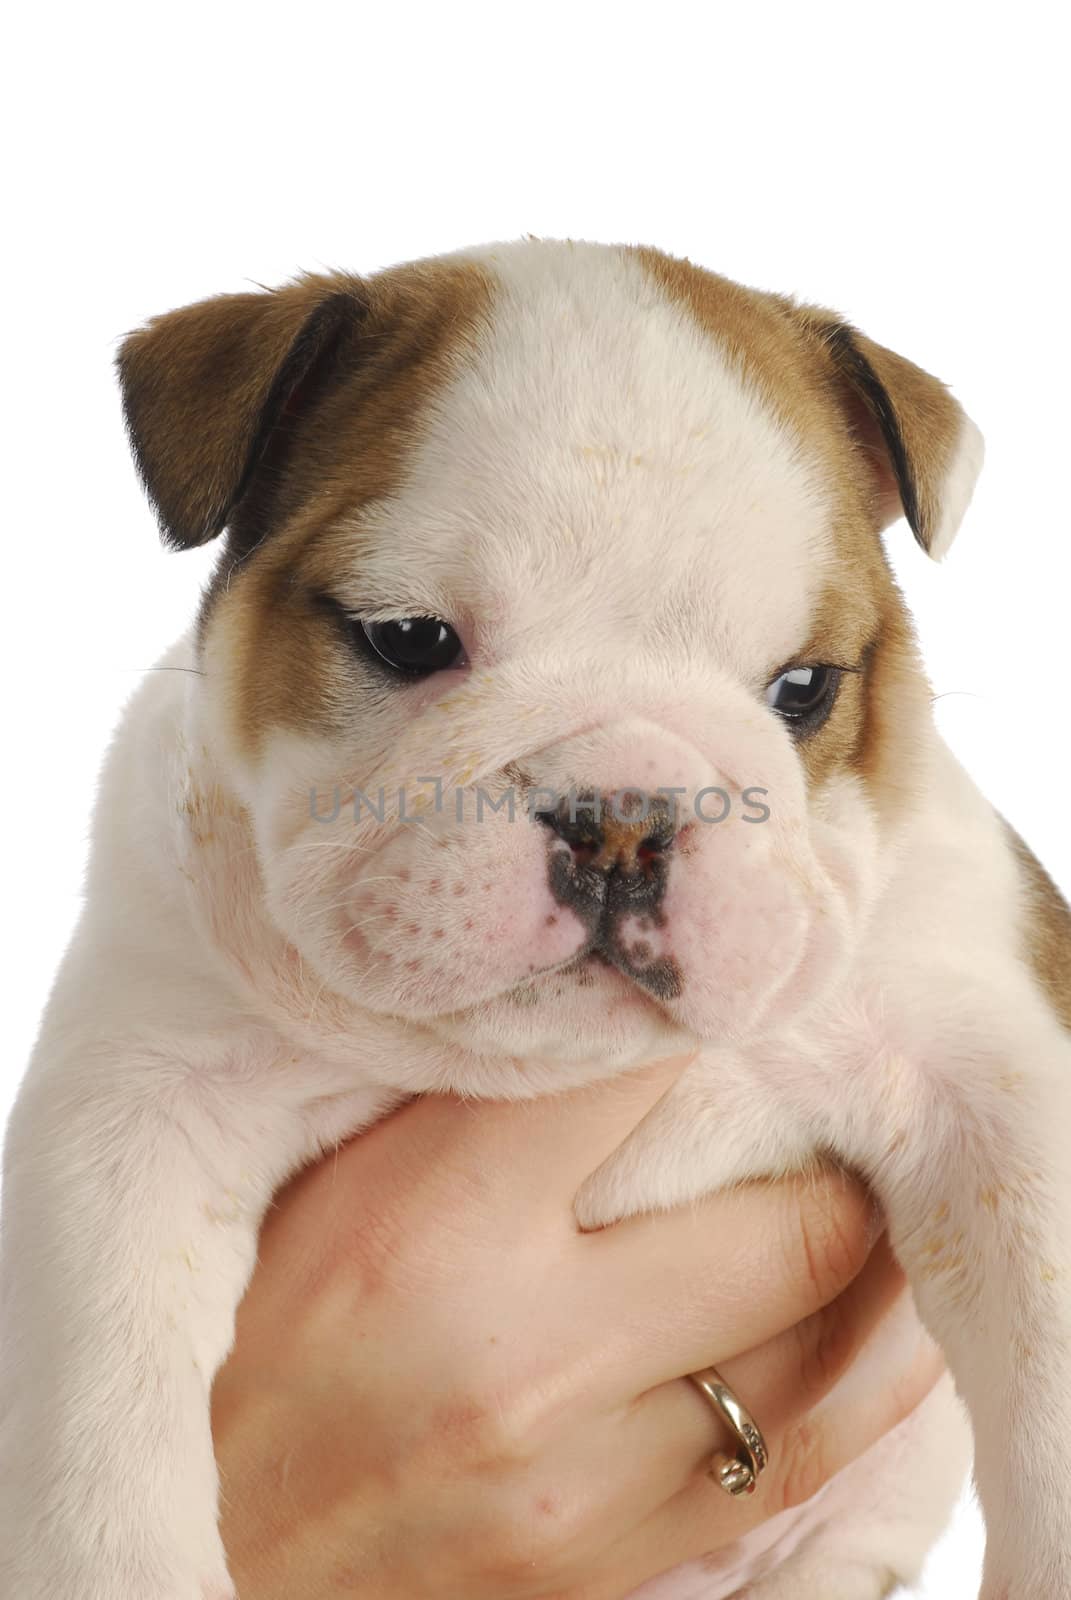 english bulldog puppy - five weeks old - on white background